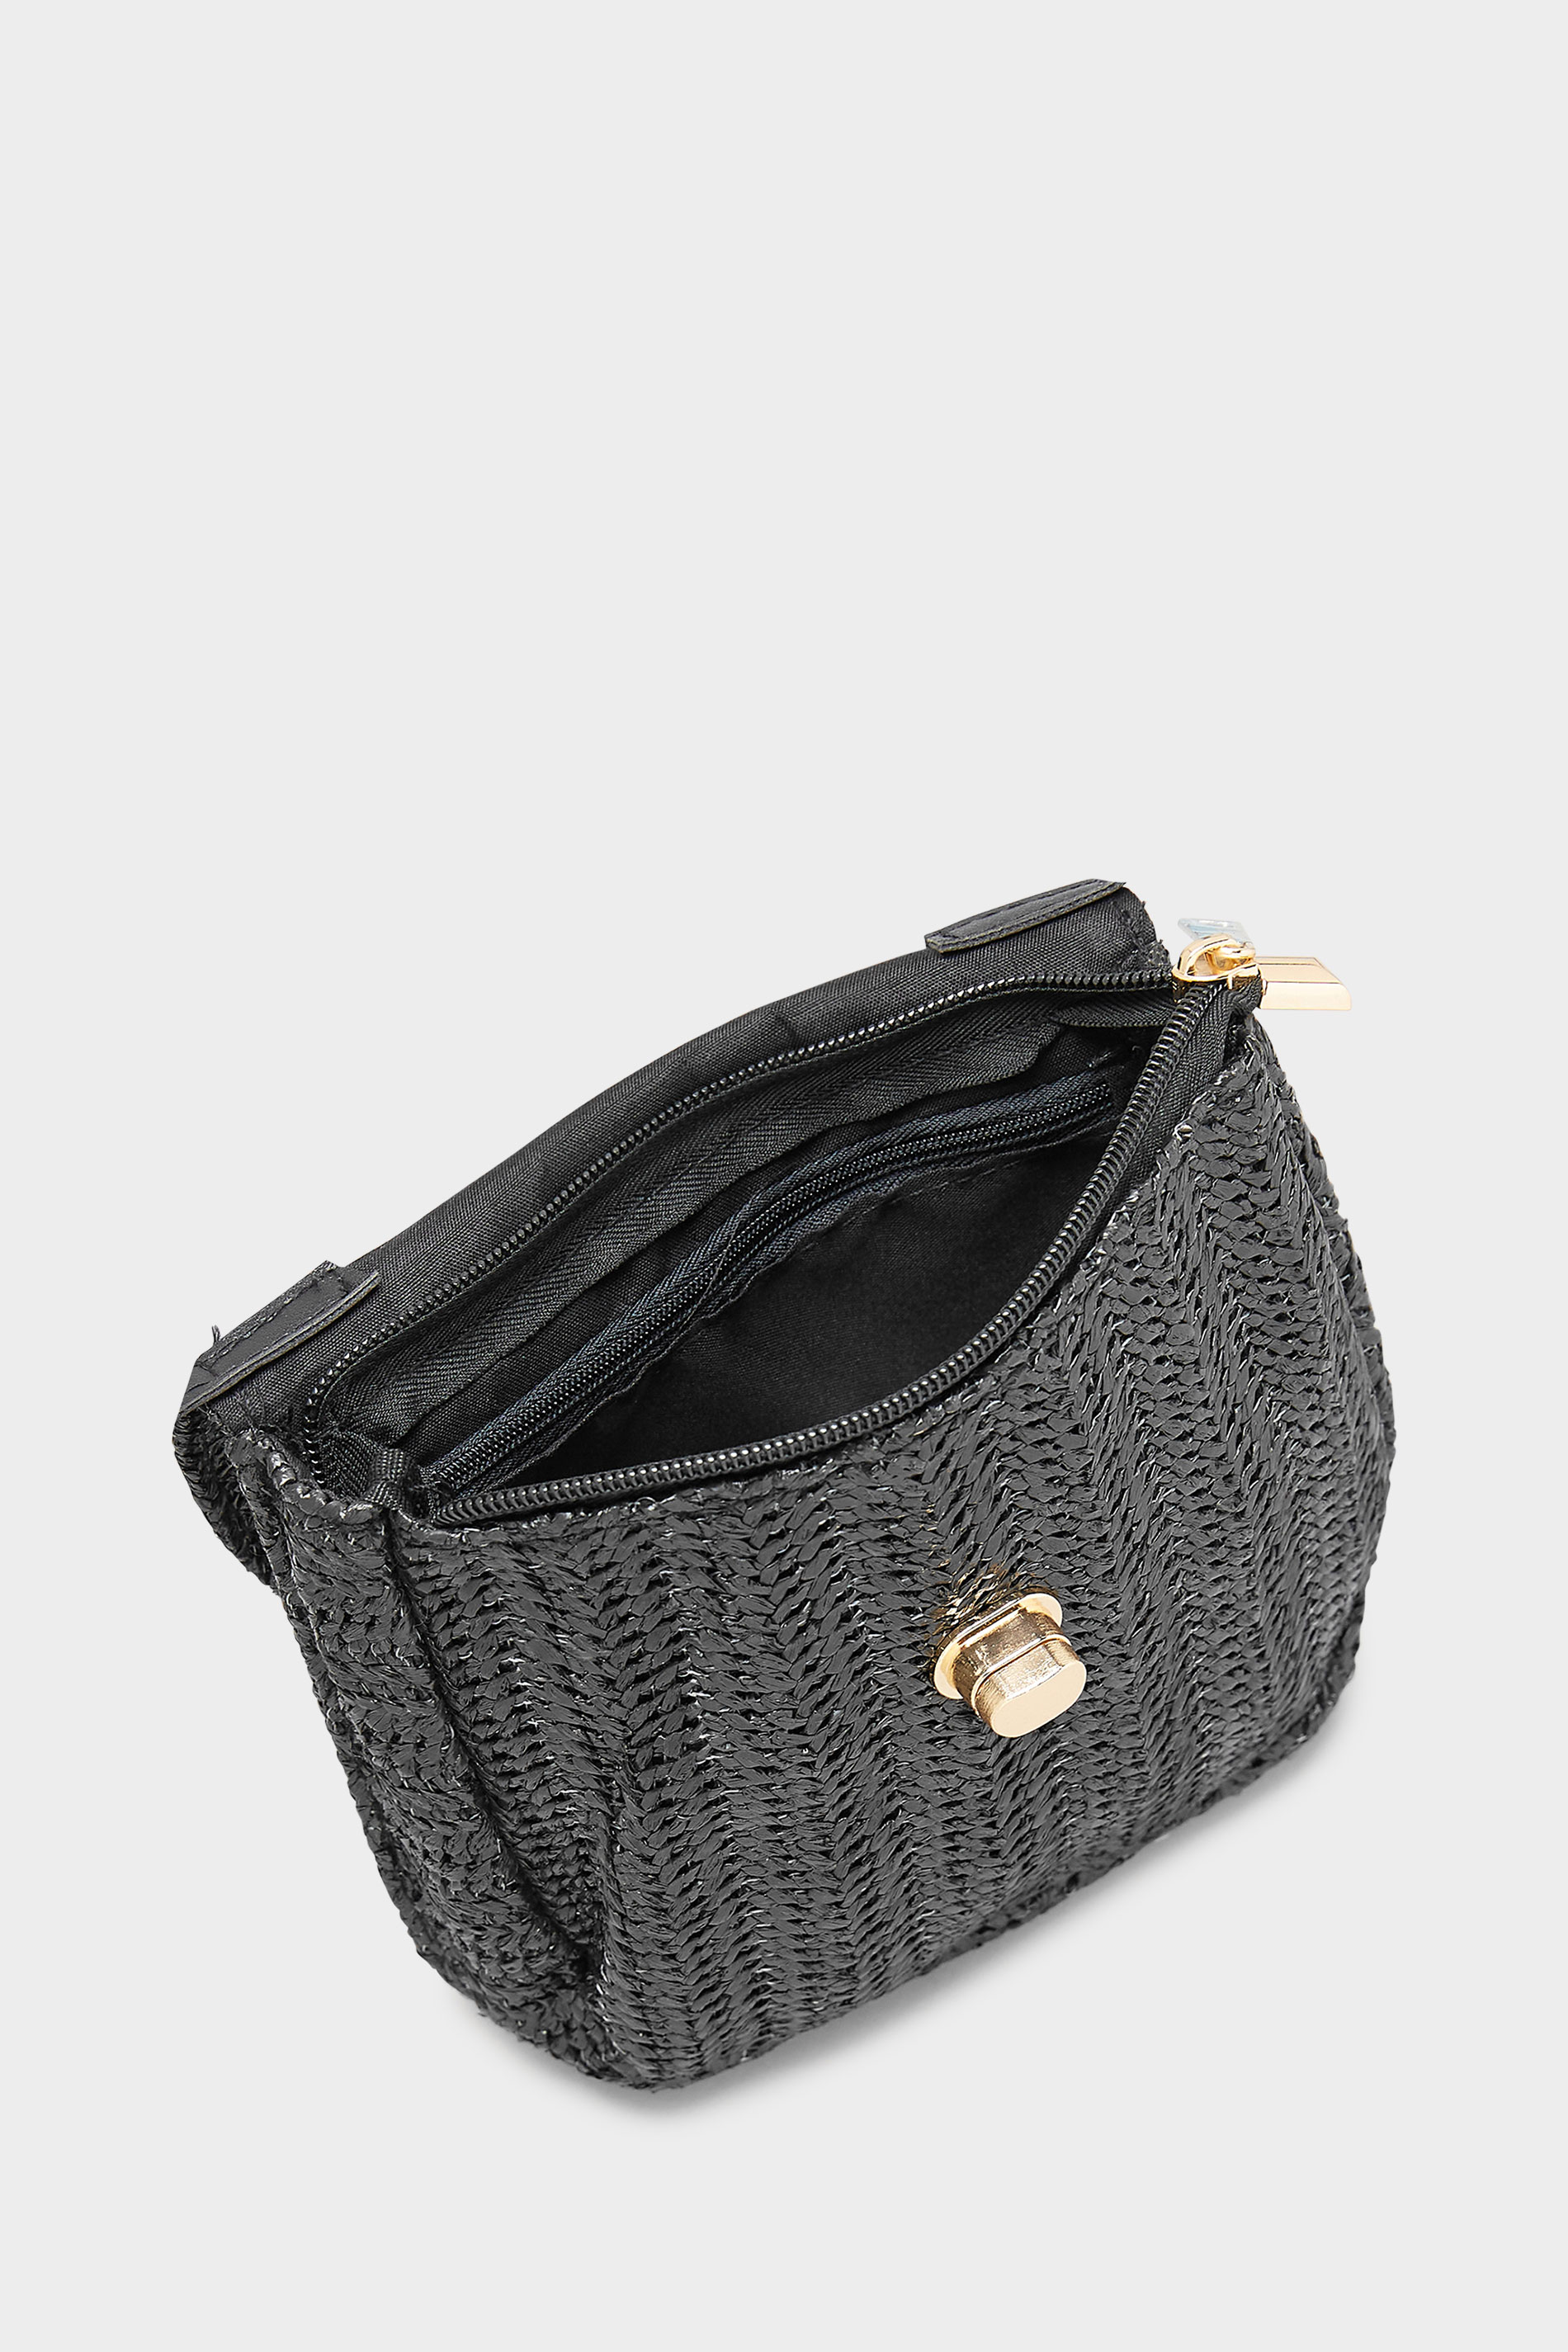 Black Straw Cross Body Day Bag | Yours Clothing